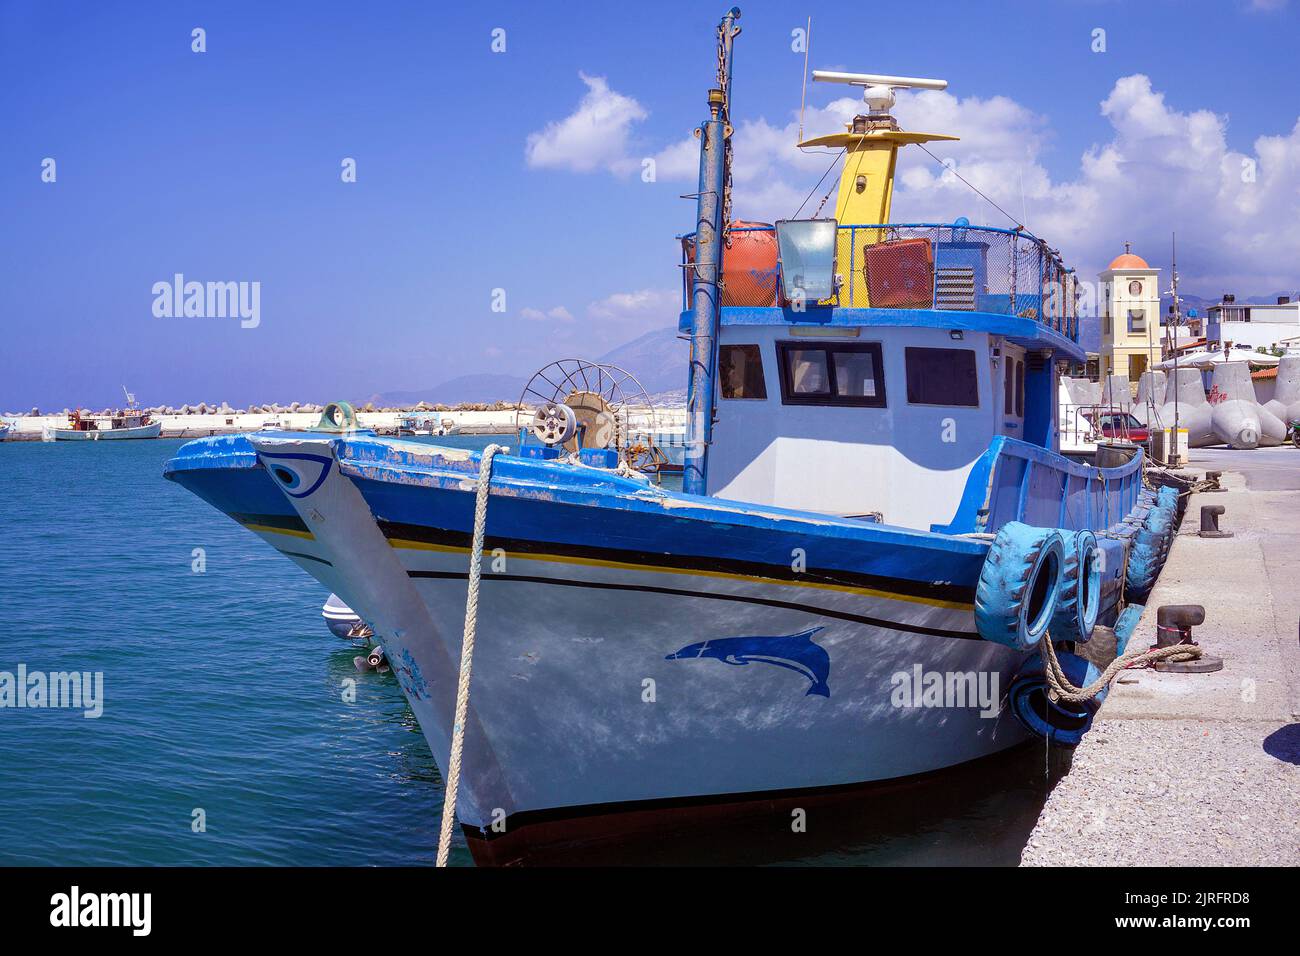 Fishing boat in the harbour of Ierapetra, the most southern city of Greece, Crete, Greece, Europe Stock Photo